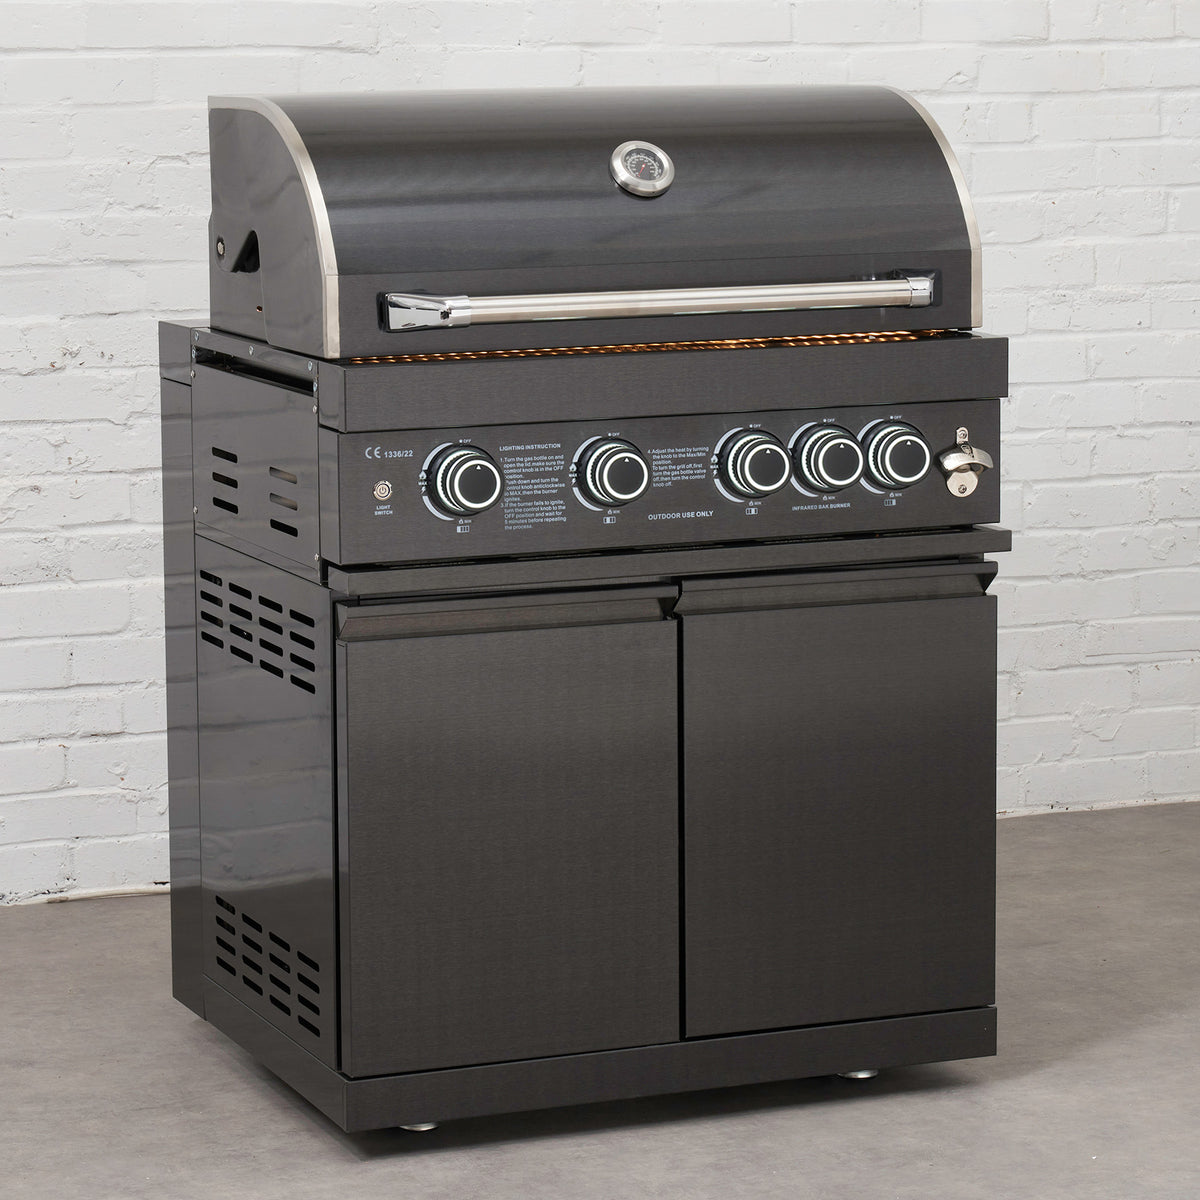 Draco Grills 4 Burner BBQ Black Stainless Steel Modular Outdoor Kitchen with Sear Station and Fridge Unit